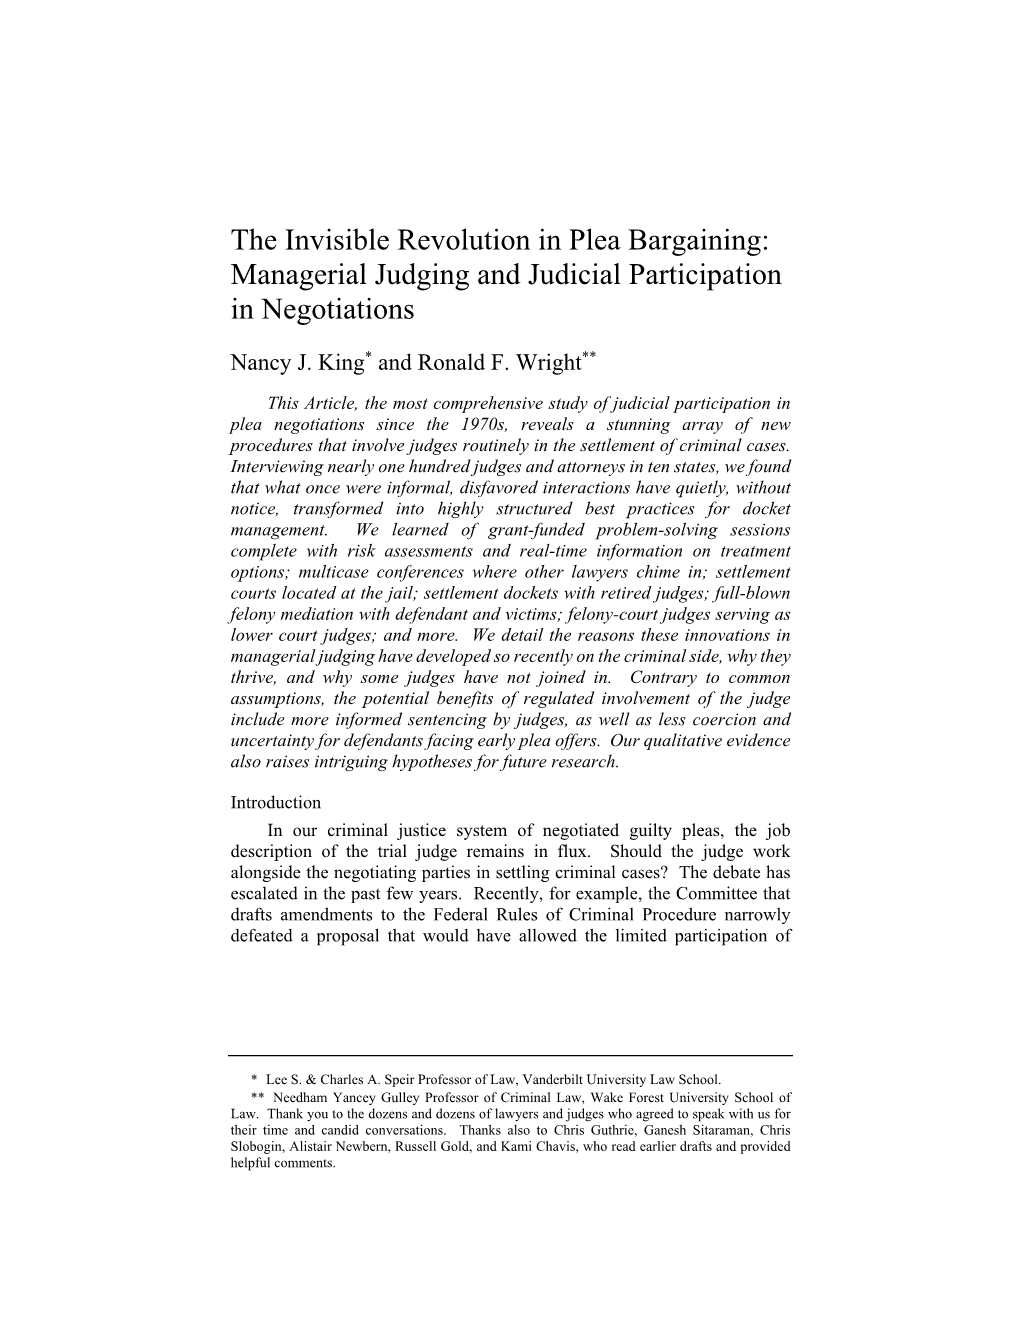 The Invisible Revolution in Plea Bargaining: Managerial Judging and Judicial Participation in Negotiations